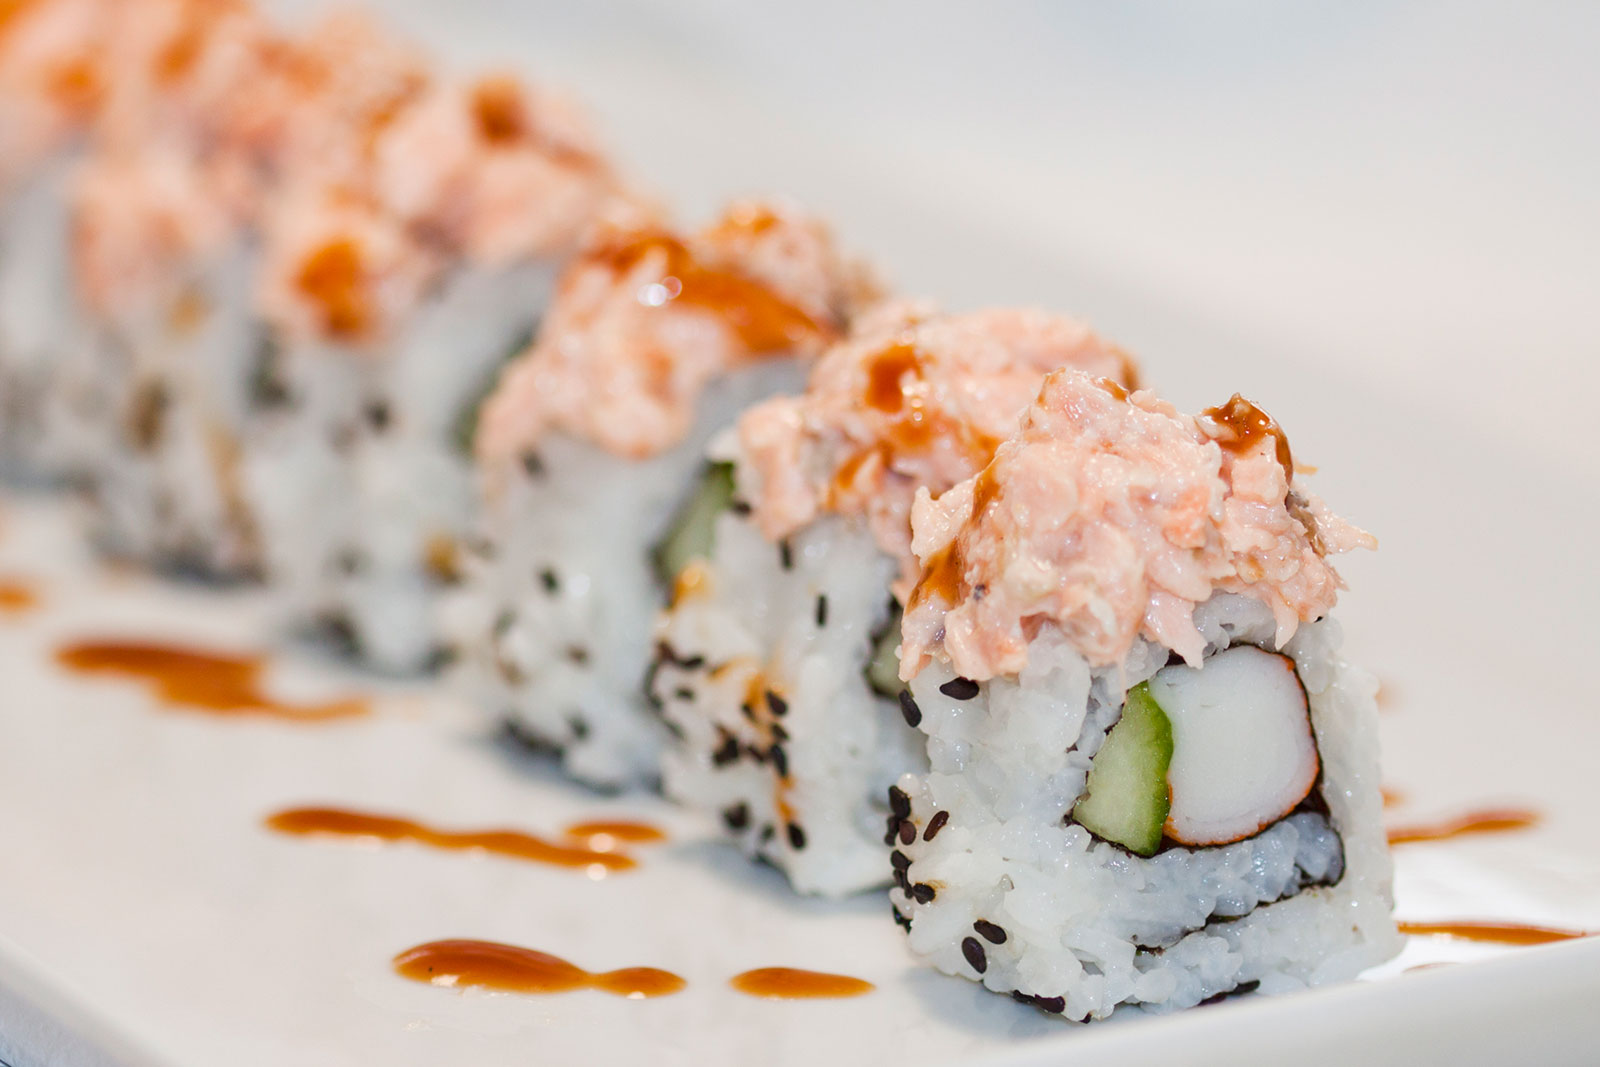 How Many of These Foods Would You Eat With Mayonnaise? Mayo Salmon Sushi Rolls